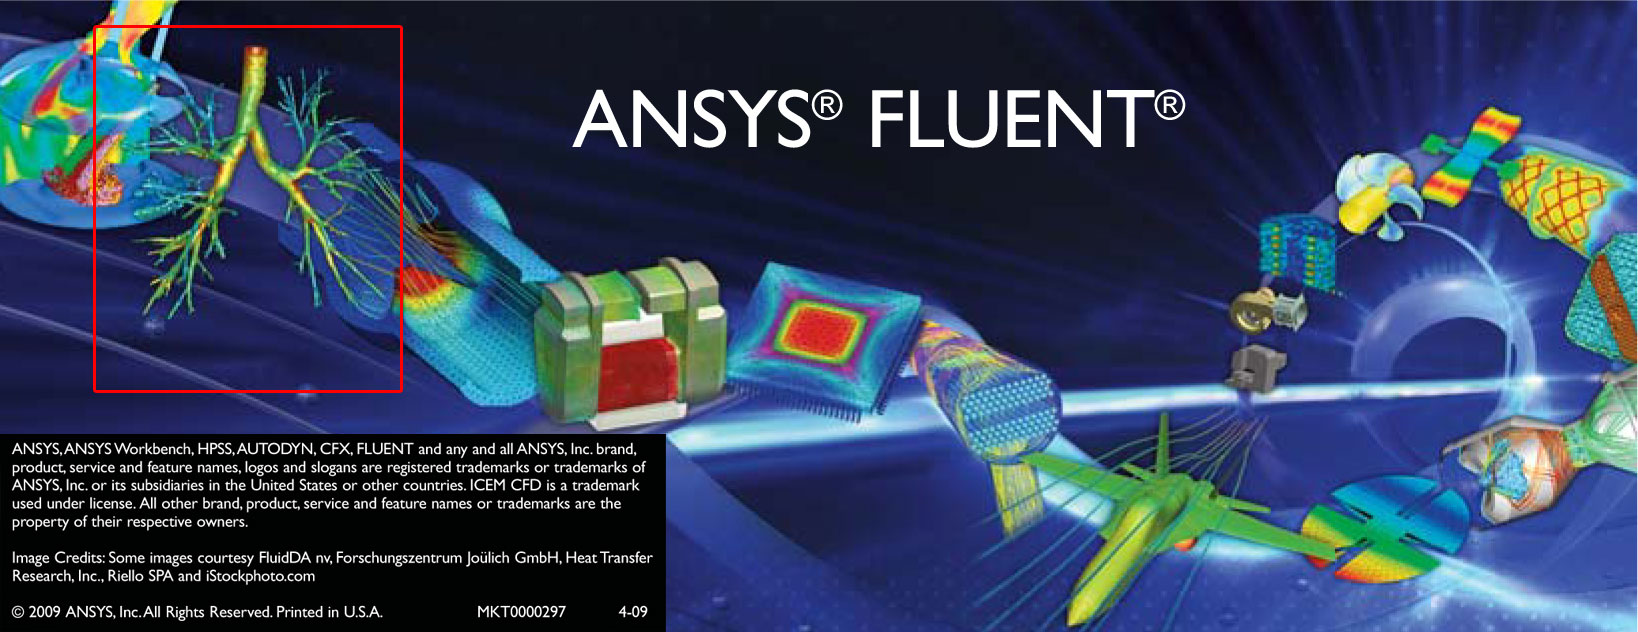 How To Install Ansys 13 Magnitude Of Earthquakes